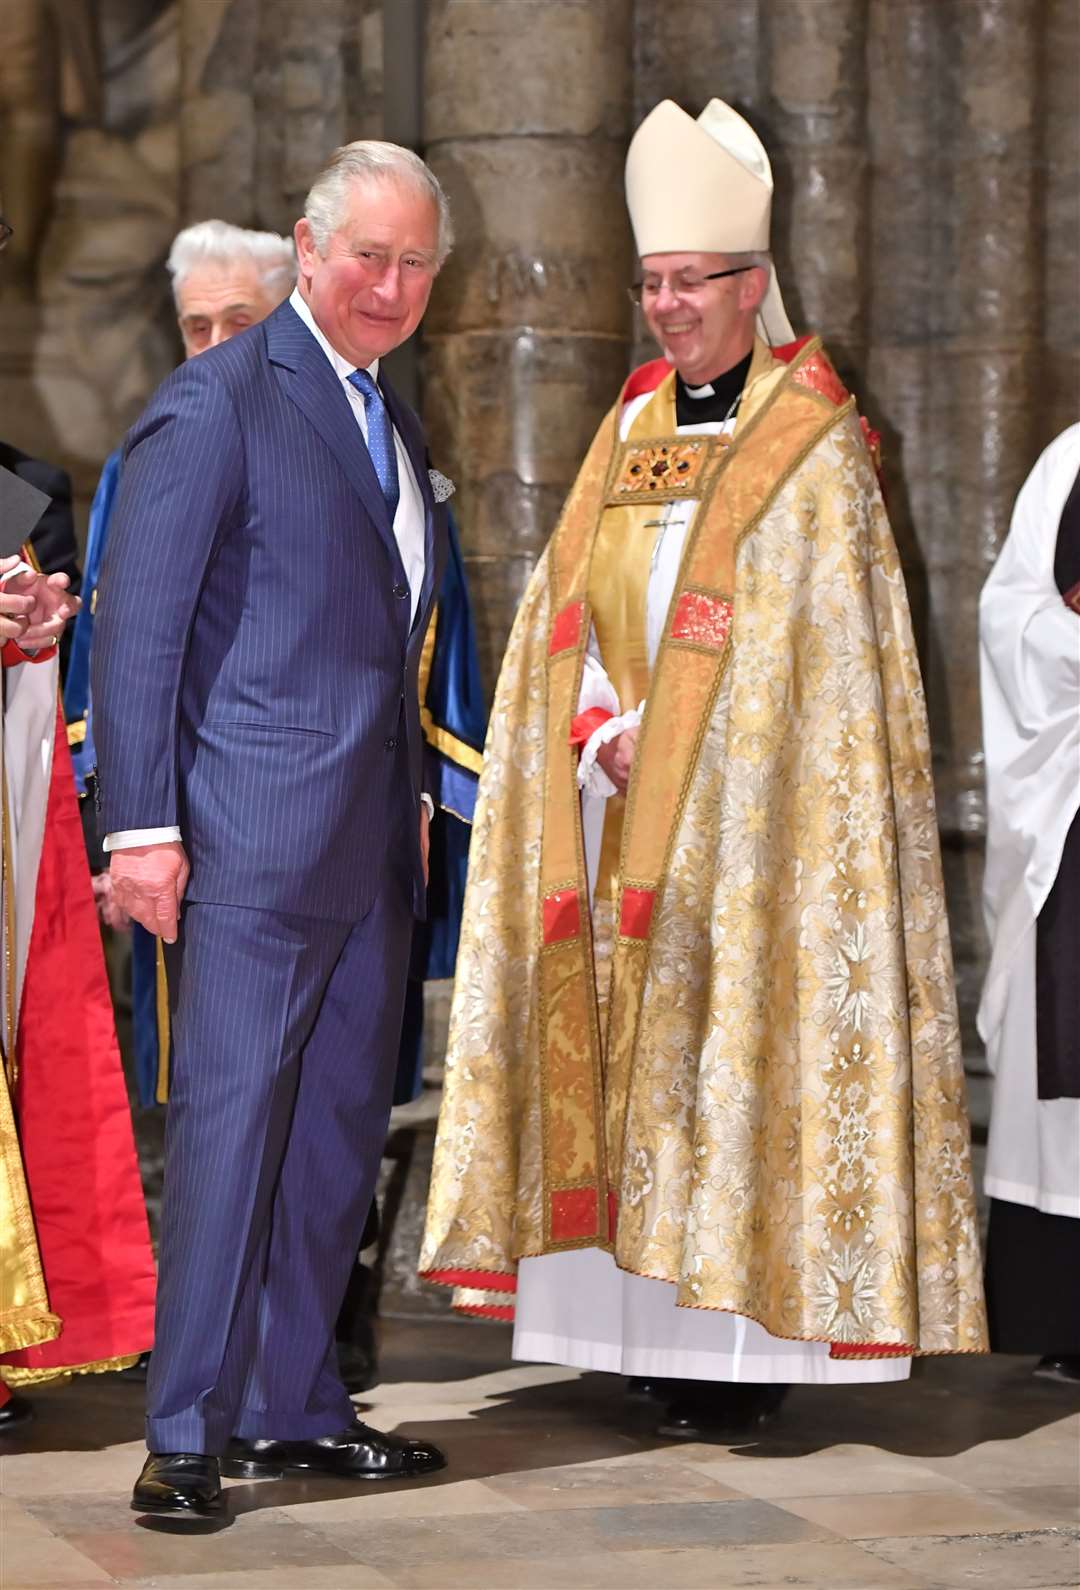 The King with the Archbishop of Canterbury Justin Welby at a service in Westminster Abbey (Dominic Lipinski/PA)